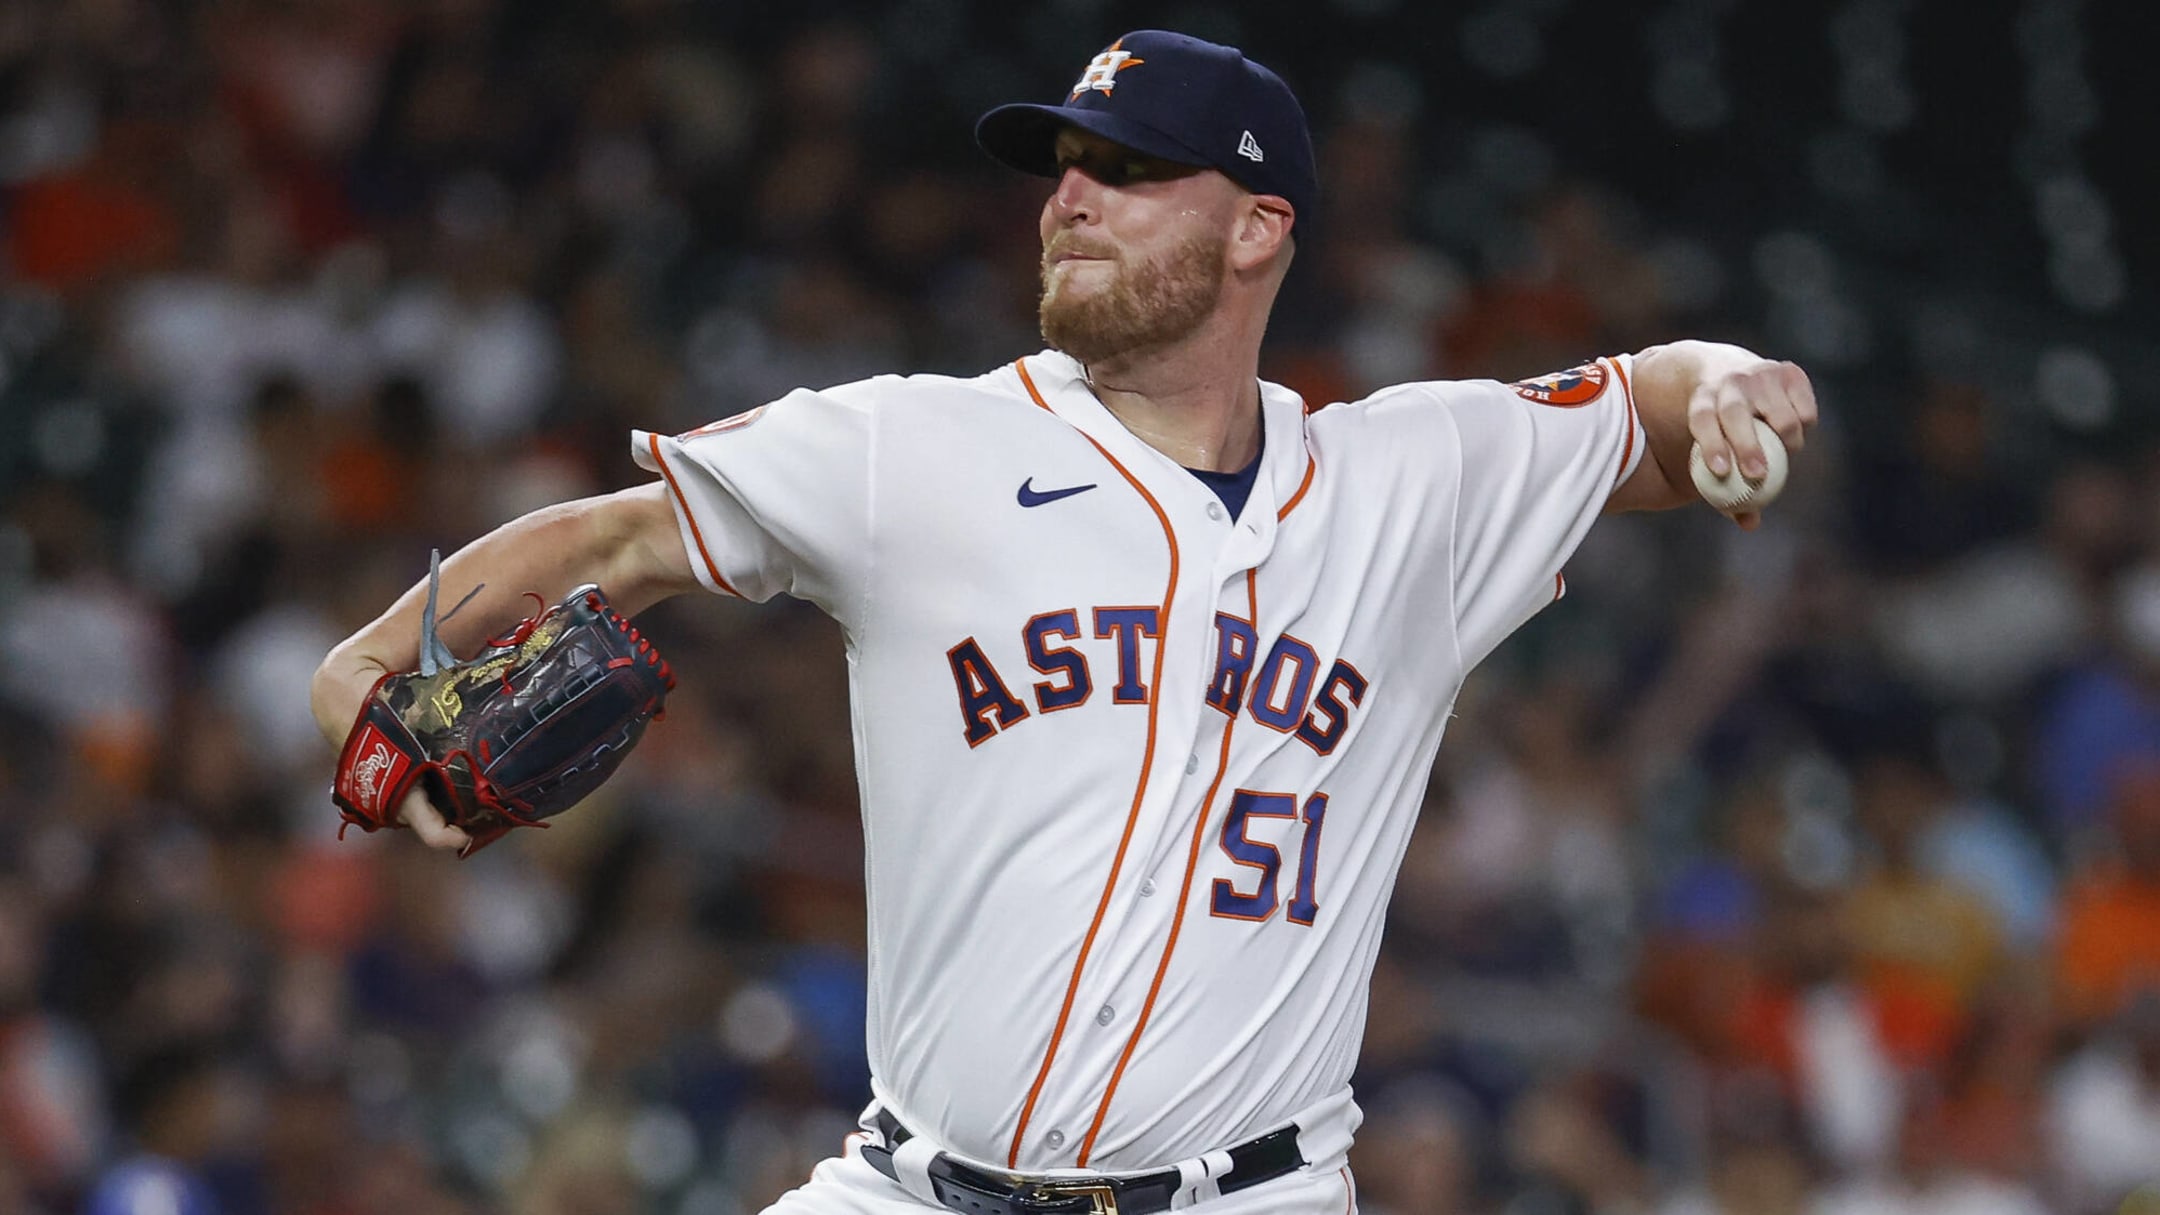 The Astros Announced Their 26-Man Opening Day Roster. - The